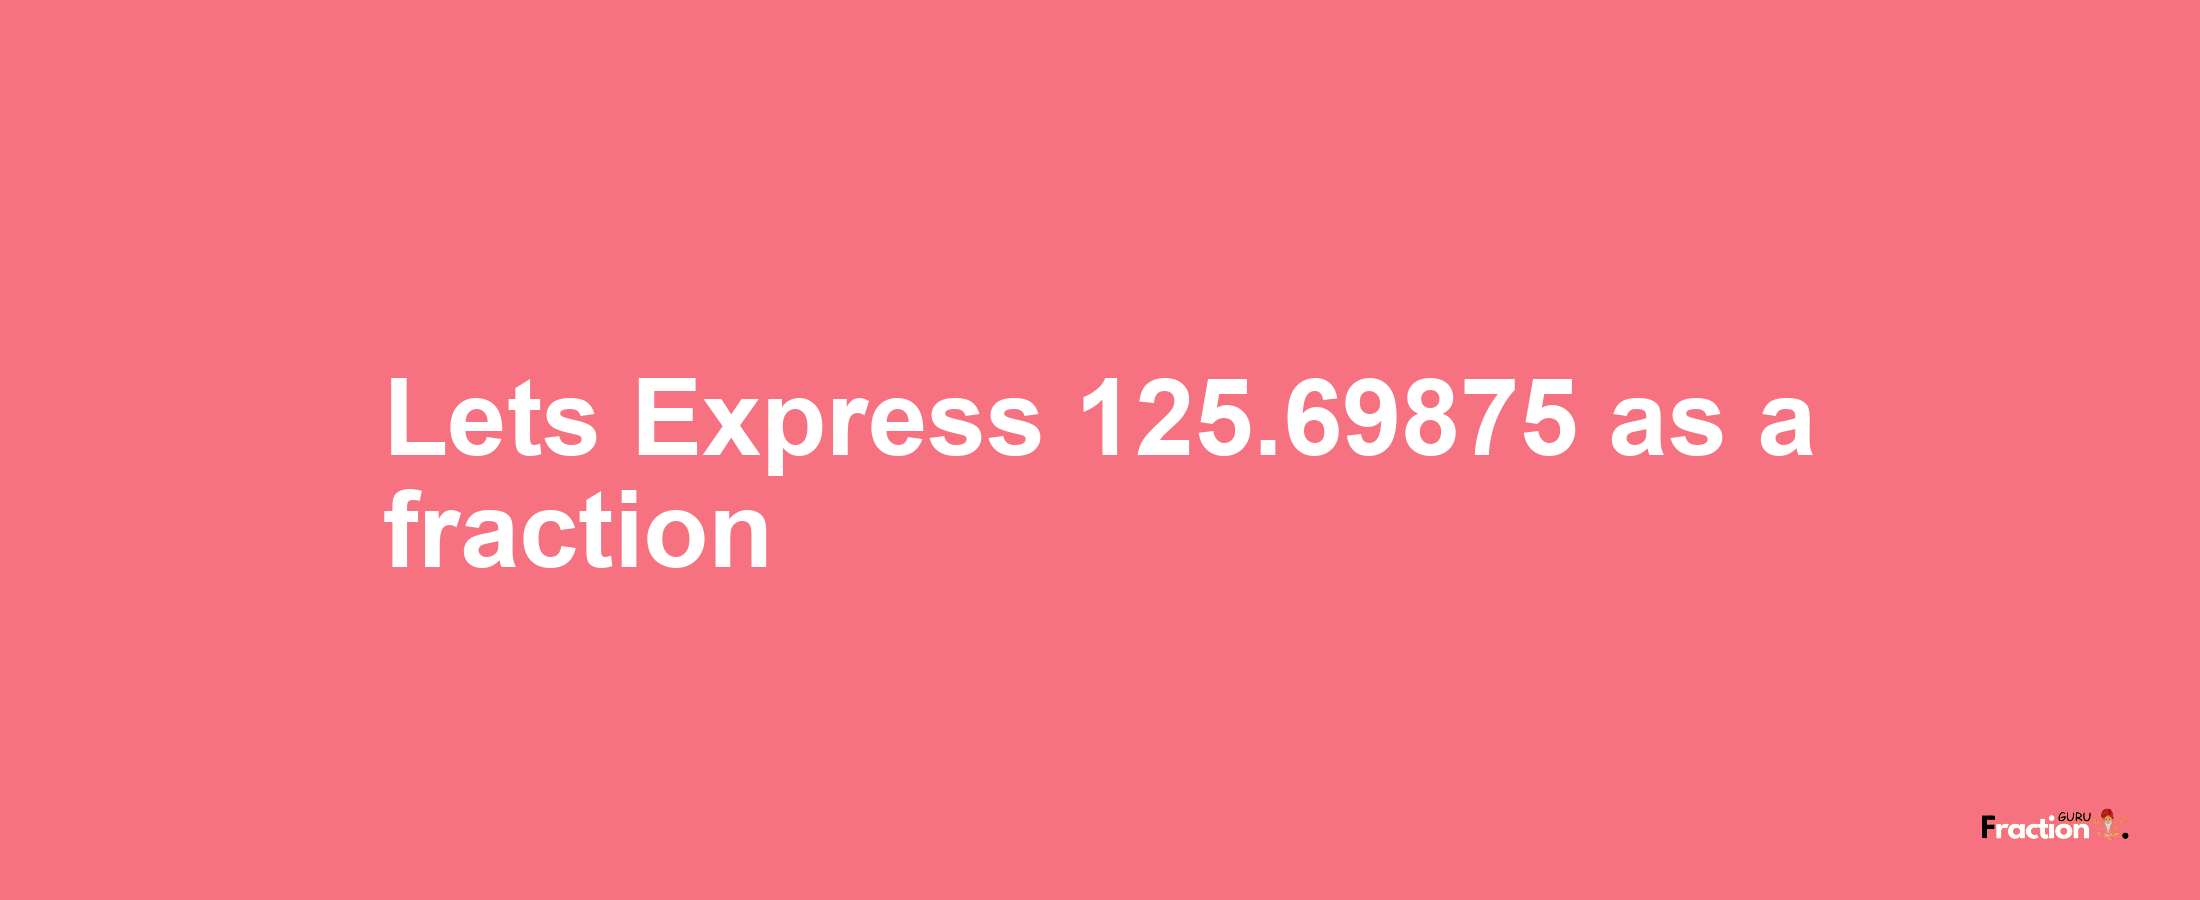 Lets Express 125.69875 as afraction